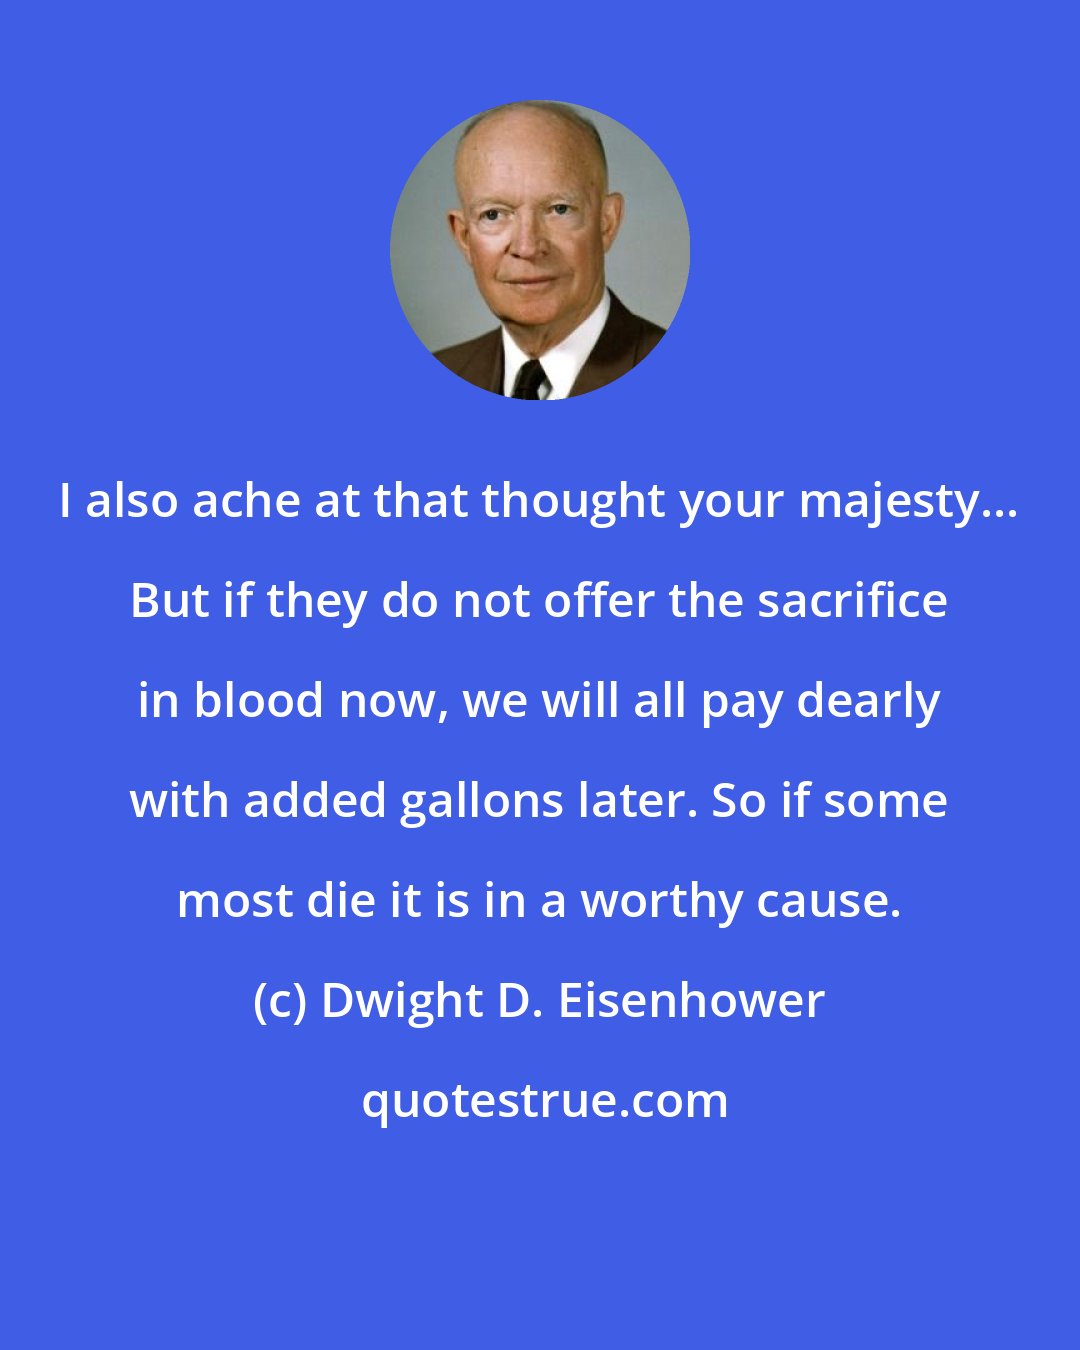 Dwight D. Eisenhower: I also ache at that thought your majesty... But if they do not offer the sacrifice in blood now, we will all pay dearly with added gallons later. So if some most die it is in a worthy cause.